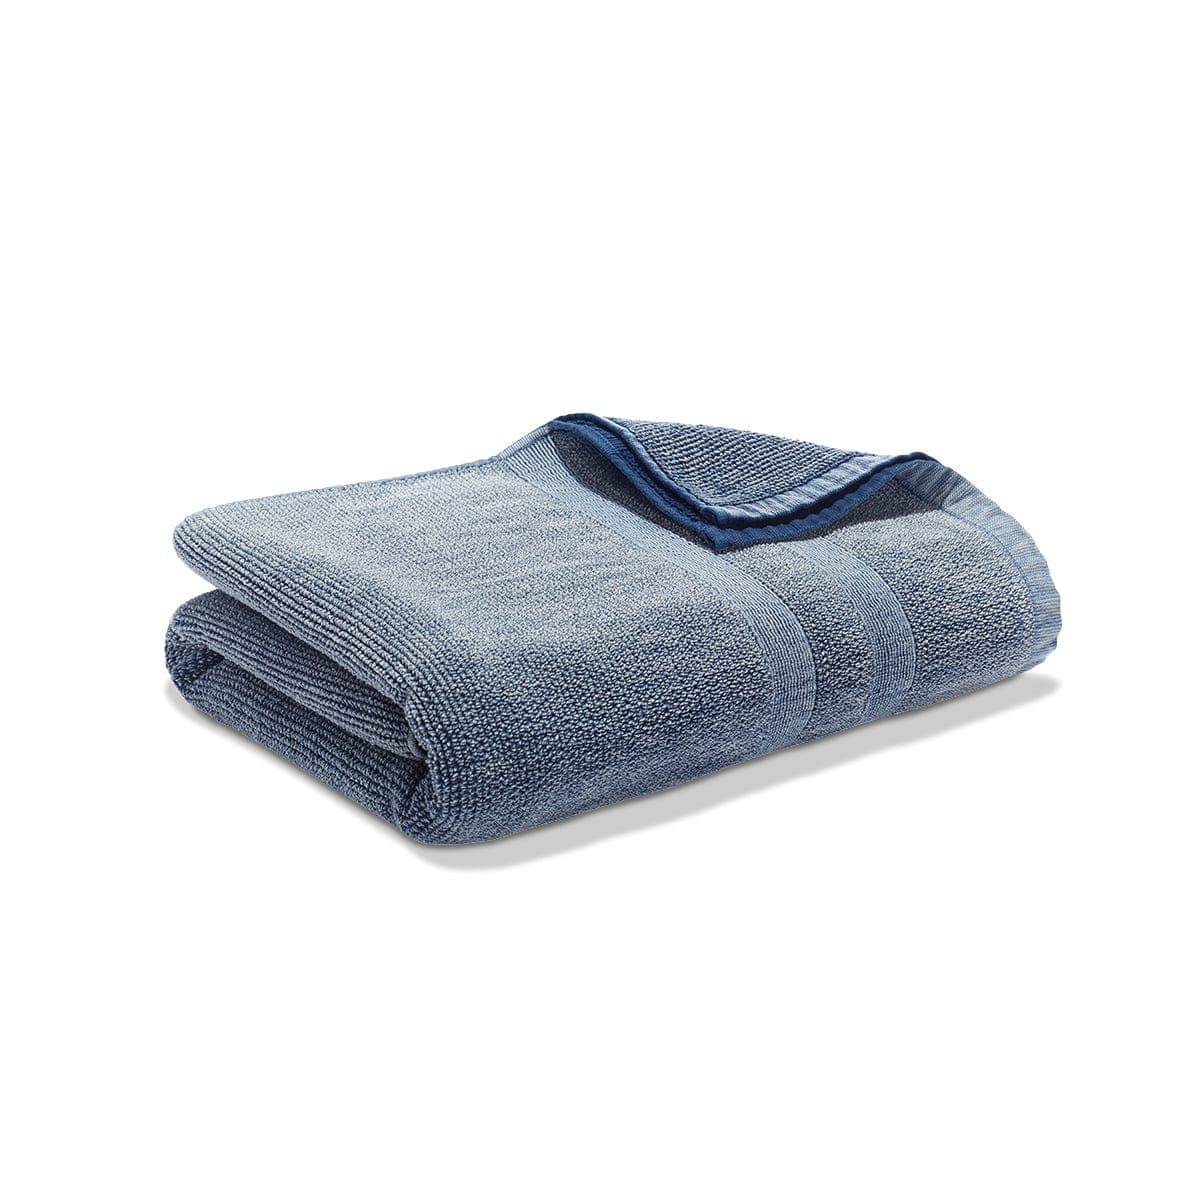 https://cdn.apartmenttherapy.info/image/upload/v1618964846/gen-workflow/product-database/riley-home-duo-towel.jpg